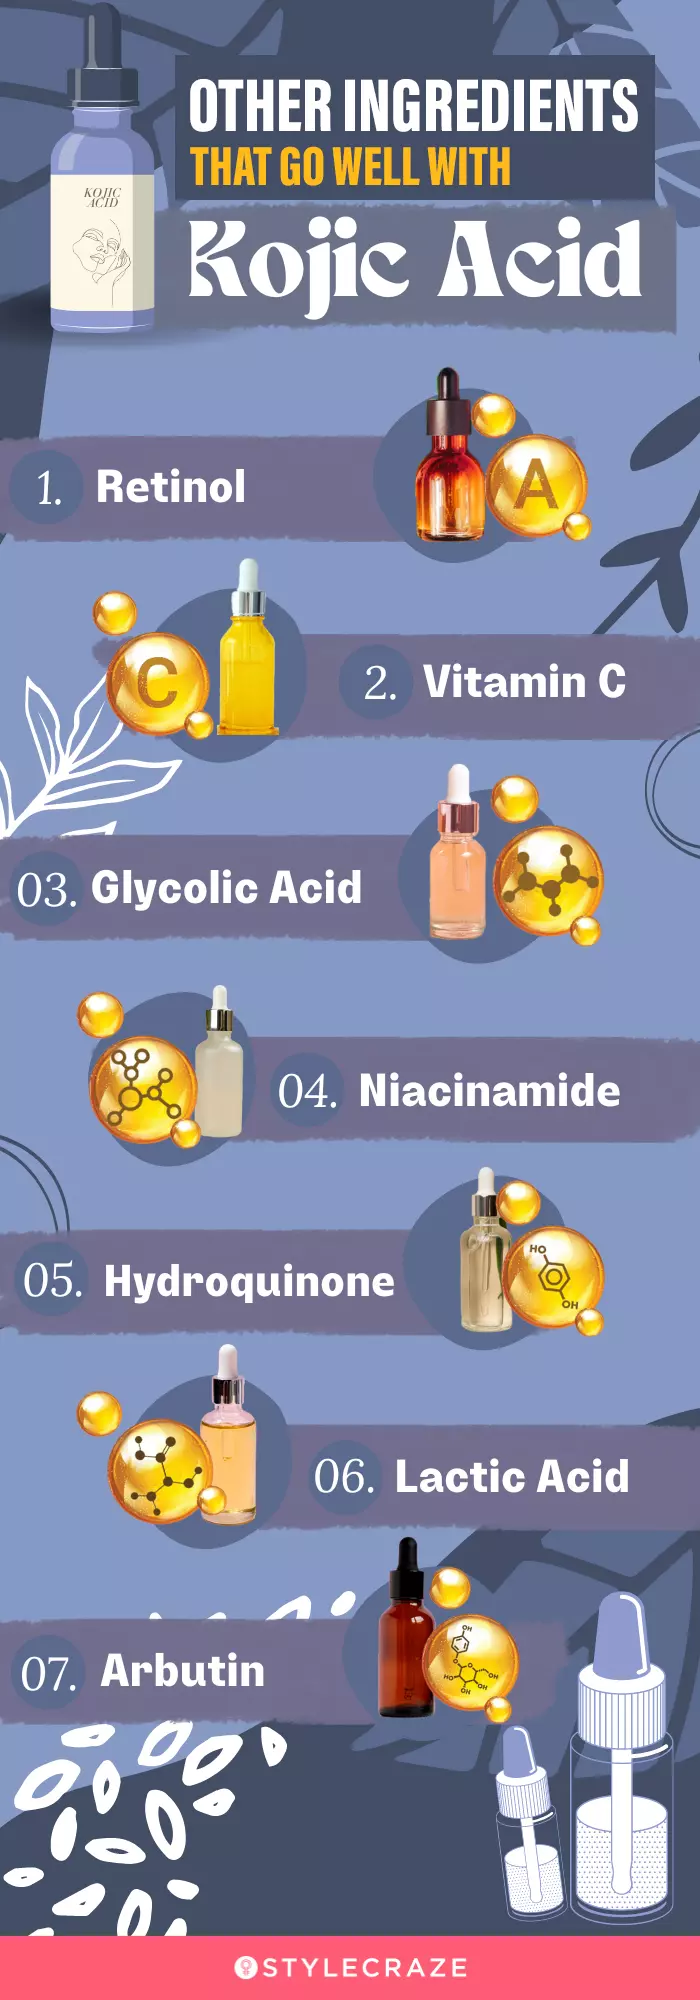 other ingredients that go well with kojic acid (infographic)